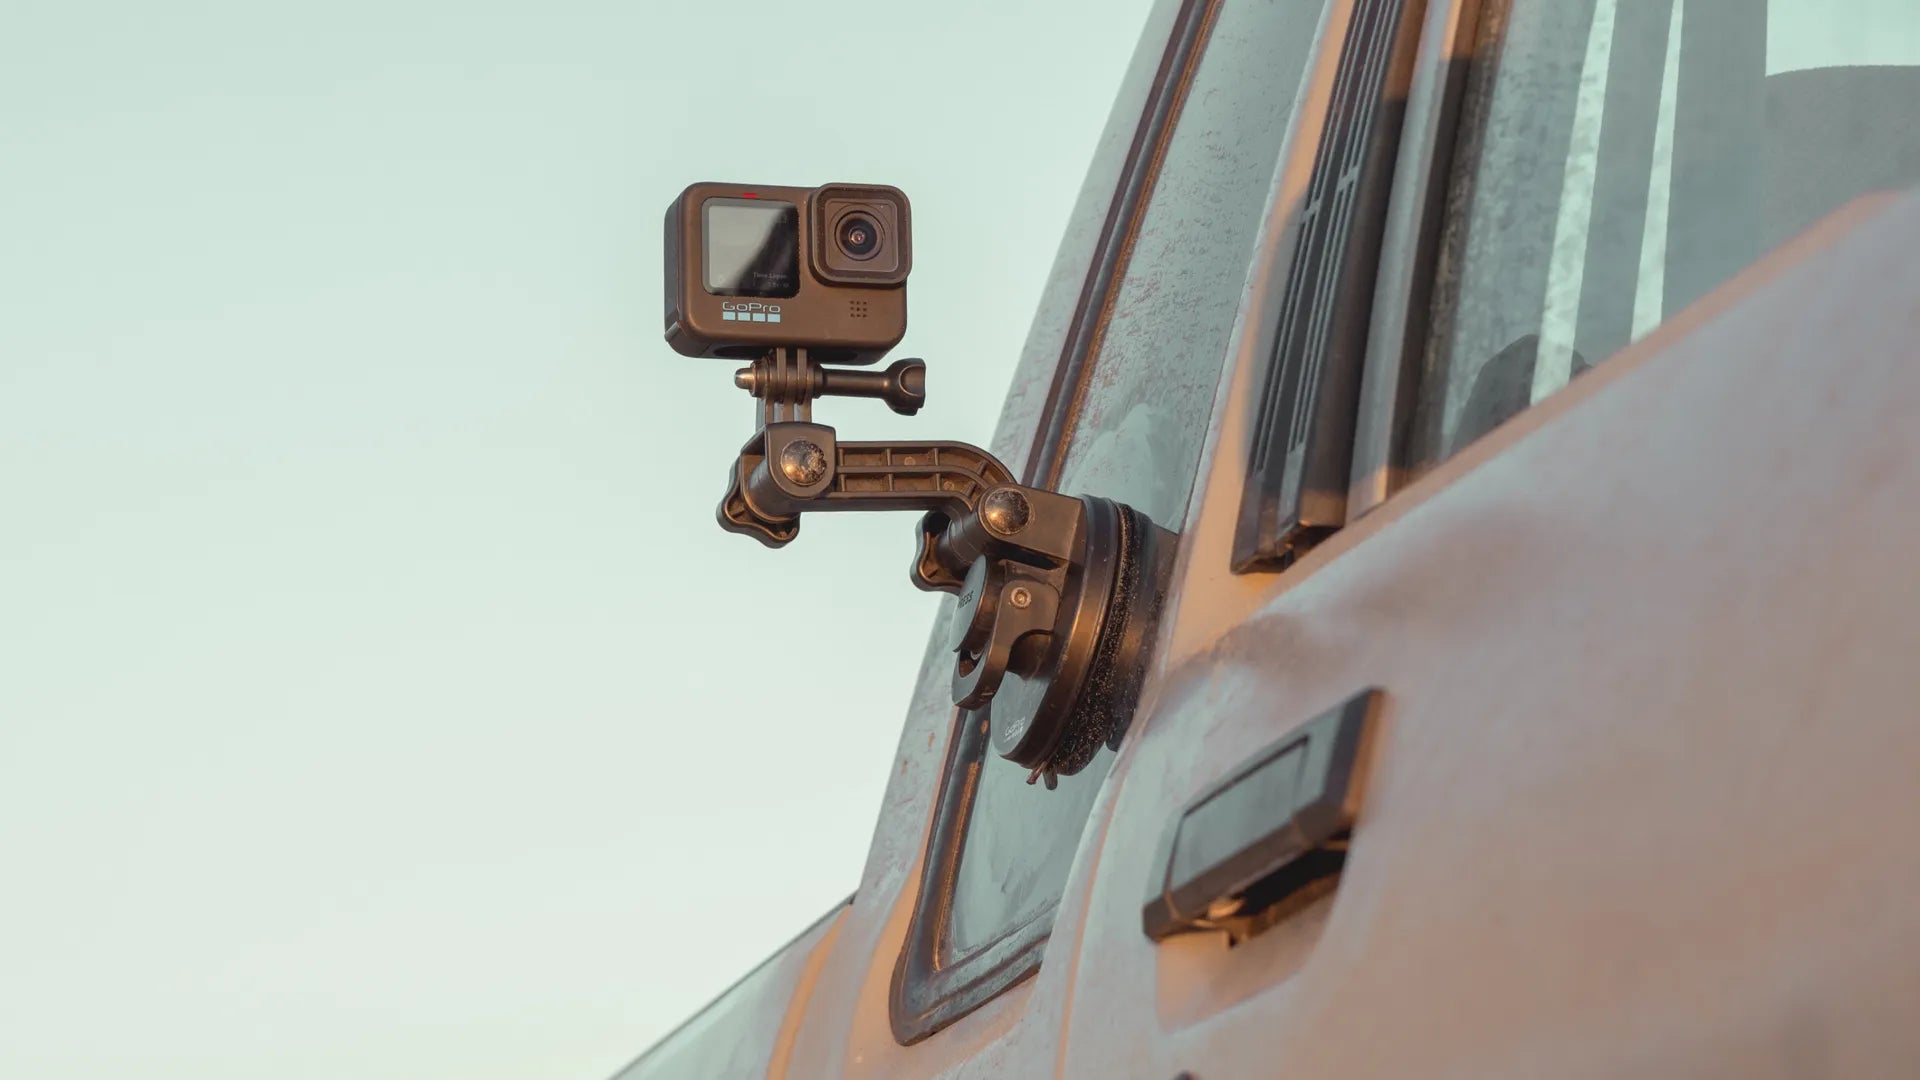 Lifestyle shot of the camera attached to the side of a pickup truck at sunset